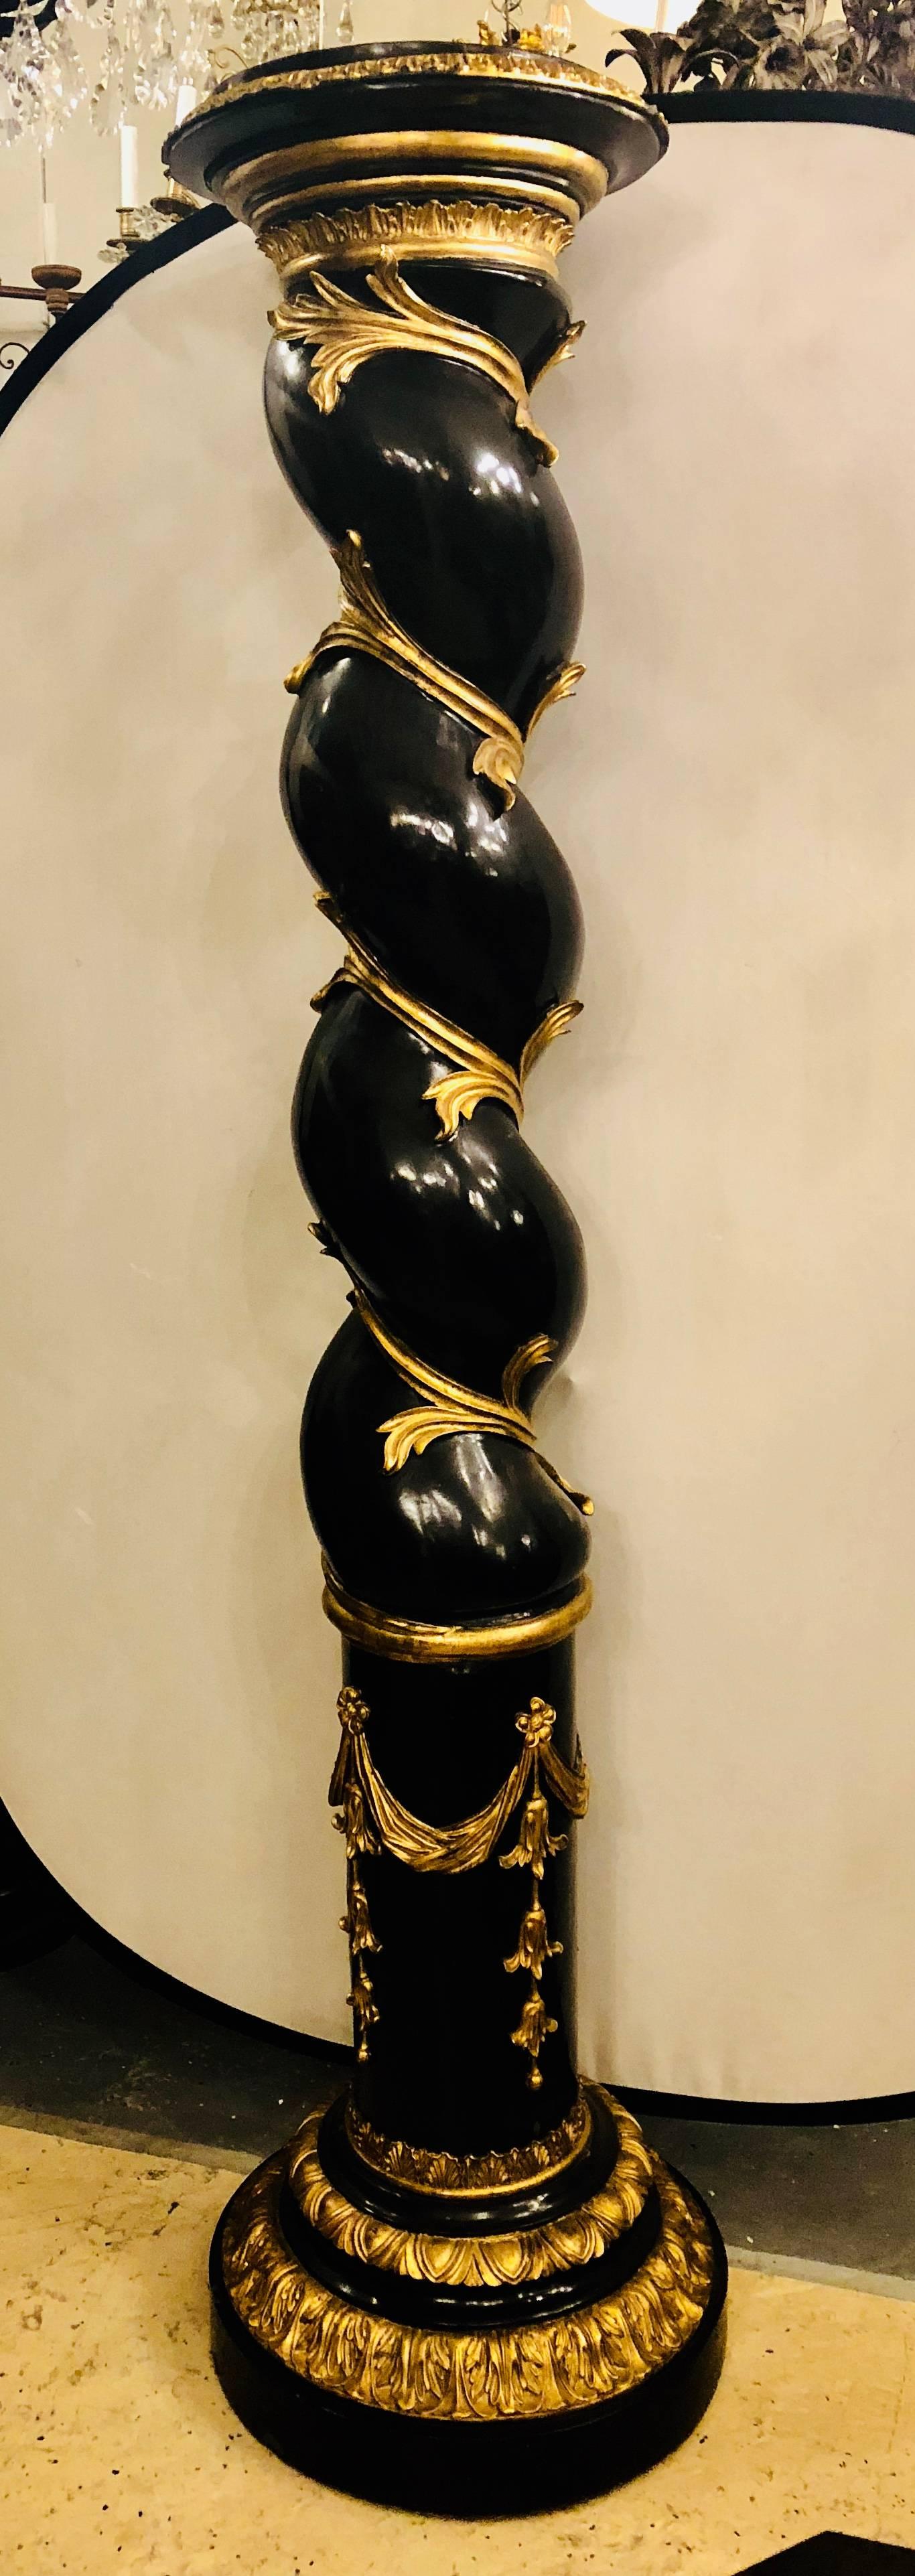 Pair of monumental Hollywood Regency style pedestals ebony and gilt gold detail. Each barley twisted enormous pedestal has fine gilt gold vines running up and down the frame. A large pair of show stoppers for those looking to really open the eyes of